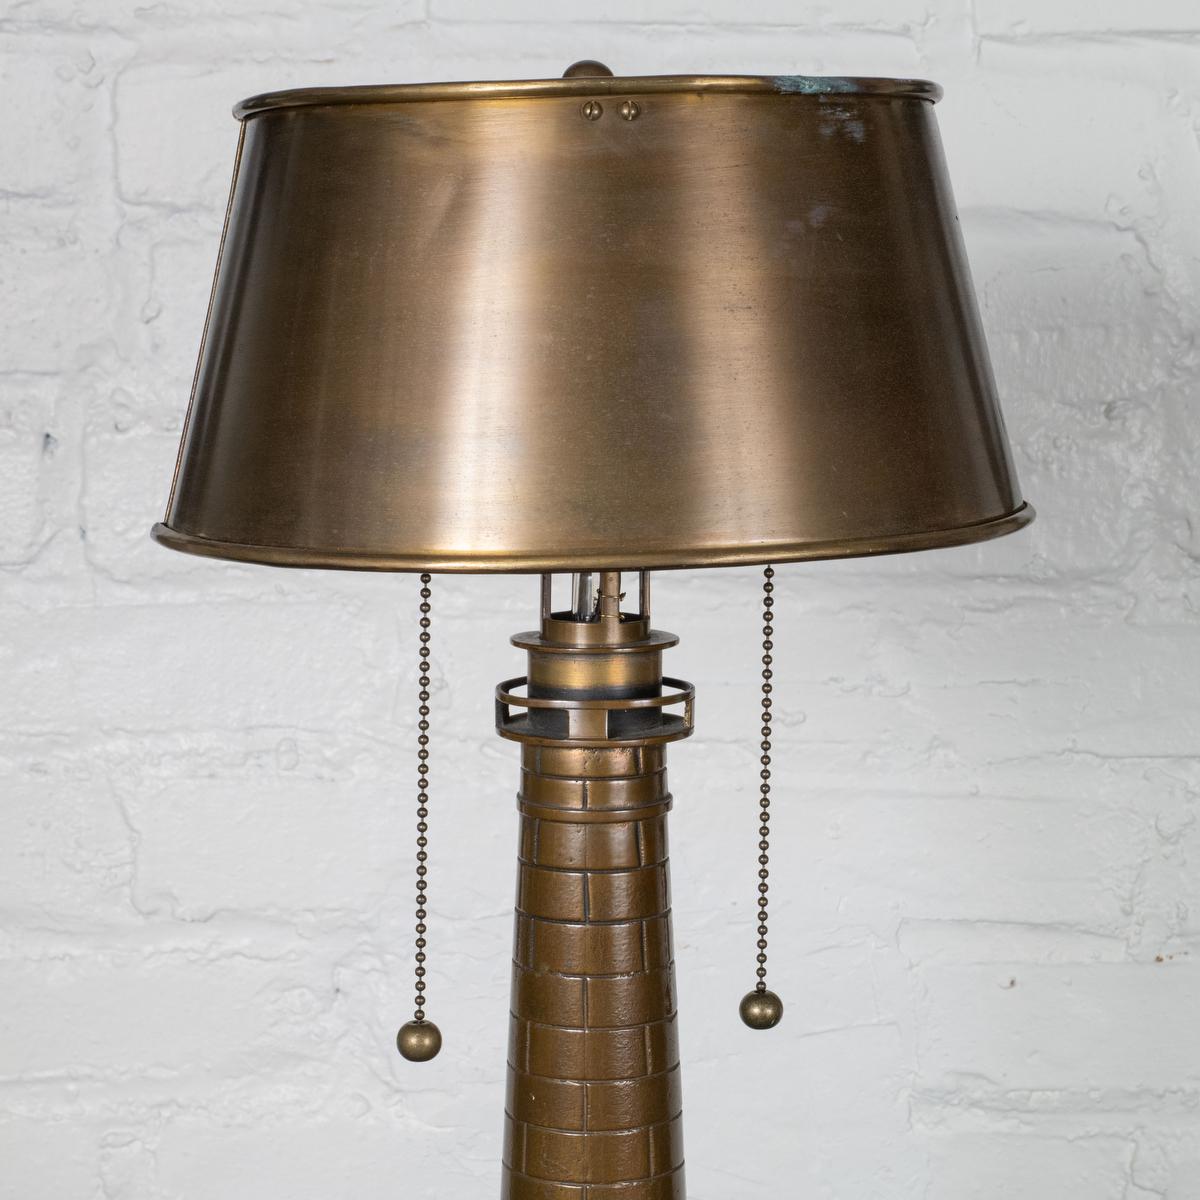 Cast bronze lighthouse table lamp For Sale 4